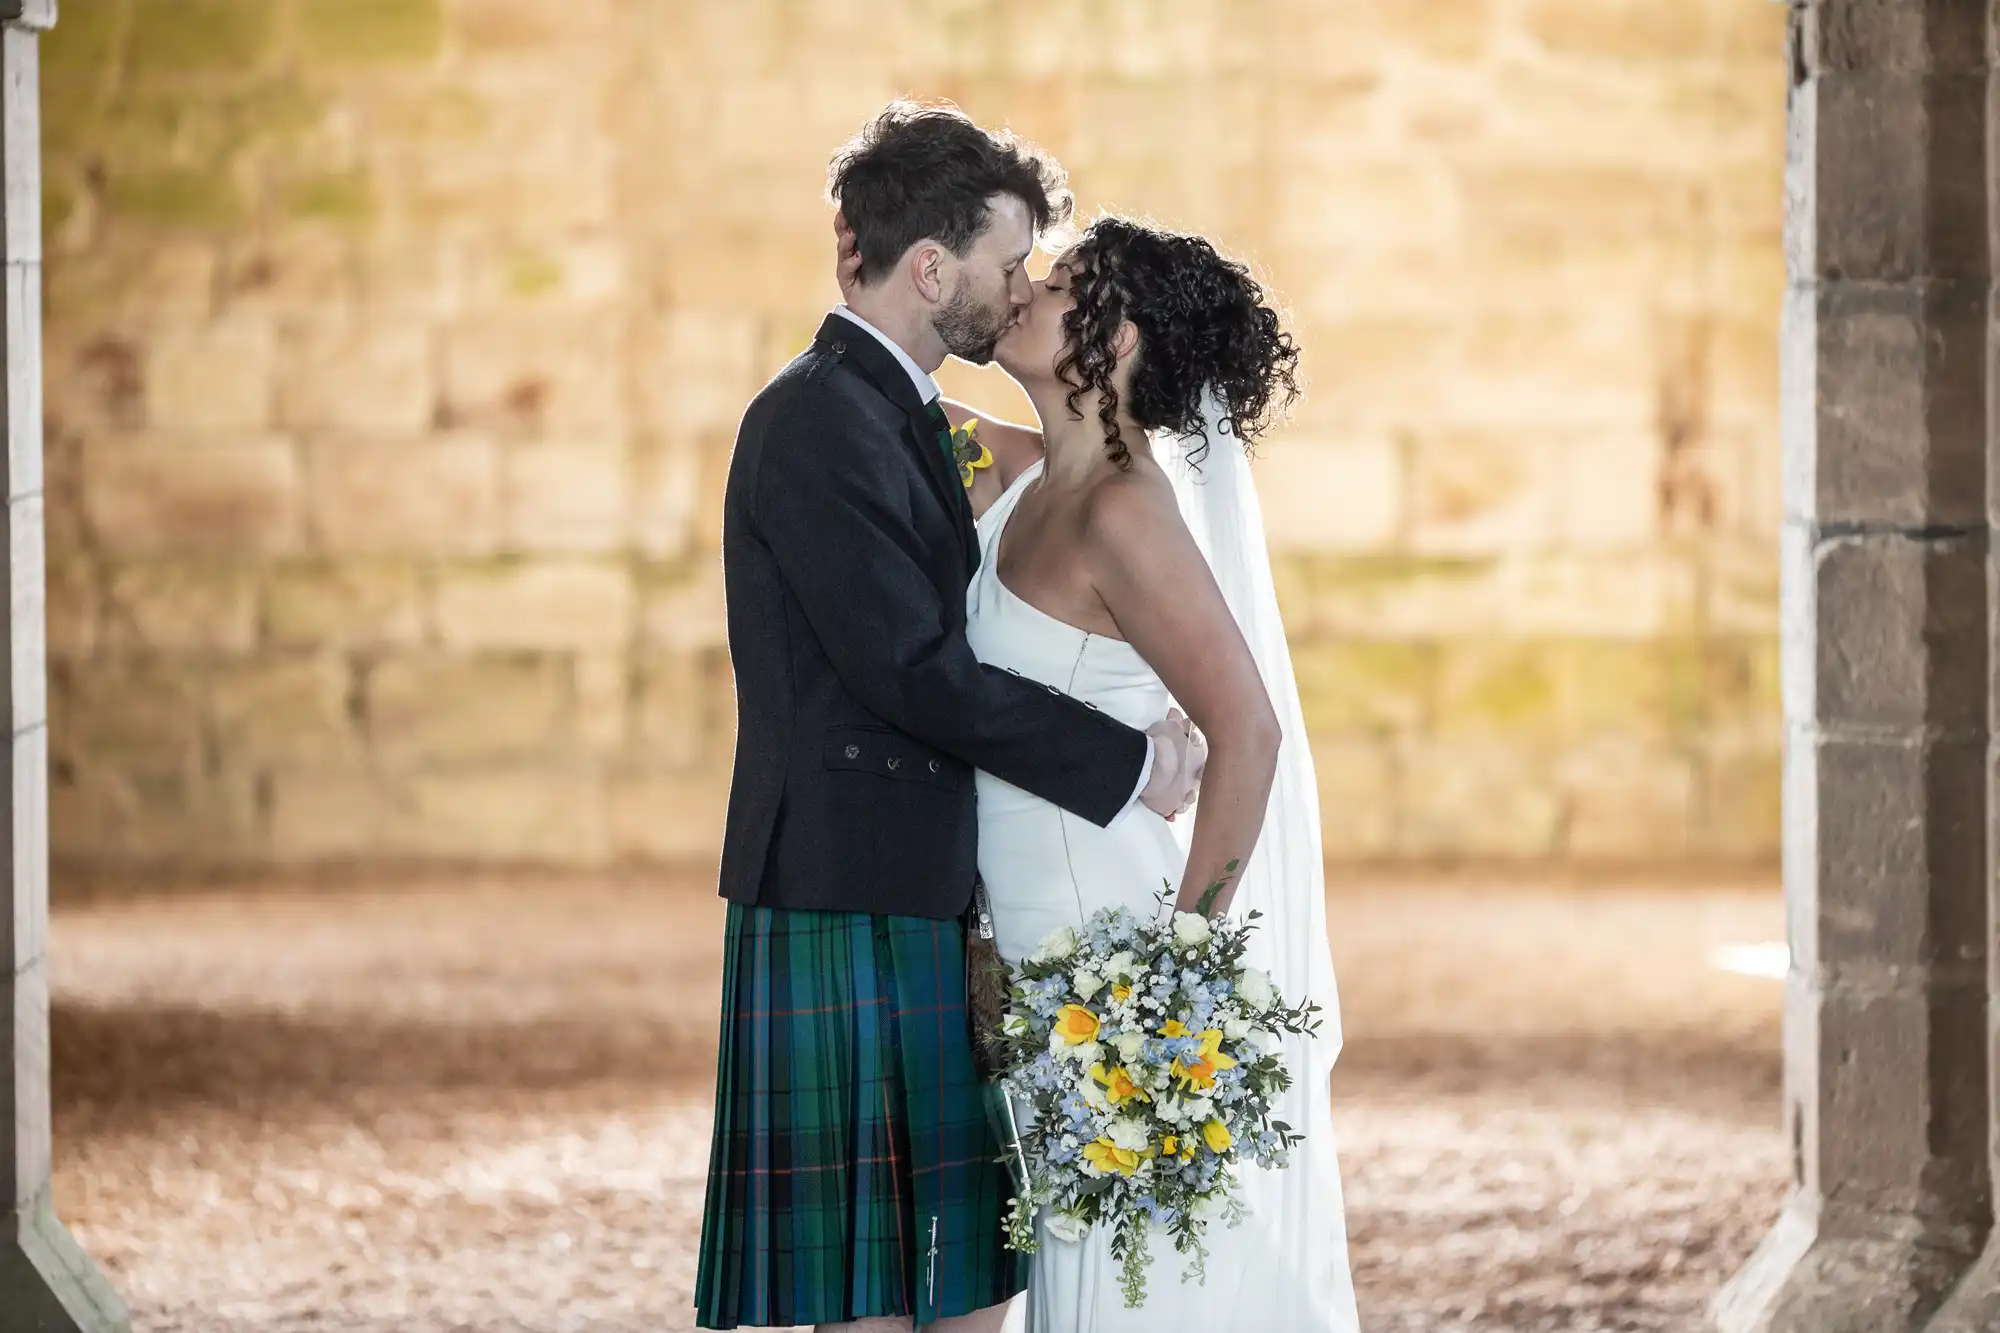 Dunglass Estate recommended photographer: A couple in wedding attire shares a kiss in front of a rustic stone wall. The groom wears a kilt and the bride holds a bouquet of yellow and white flowers.